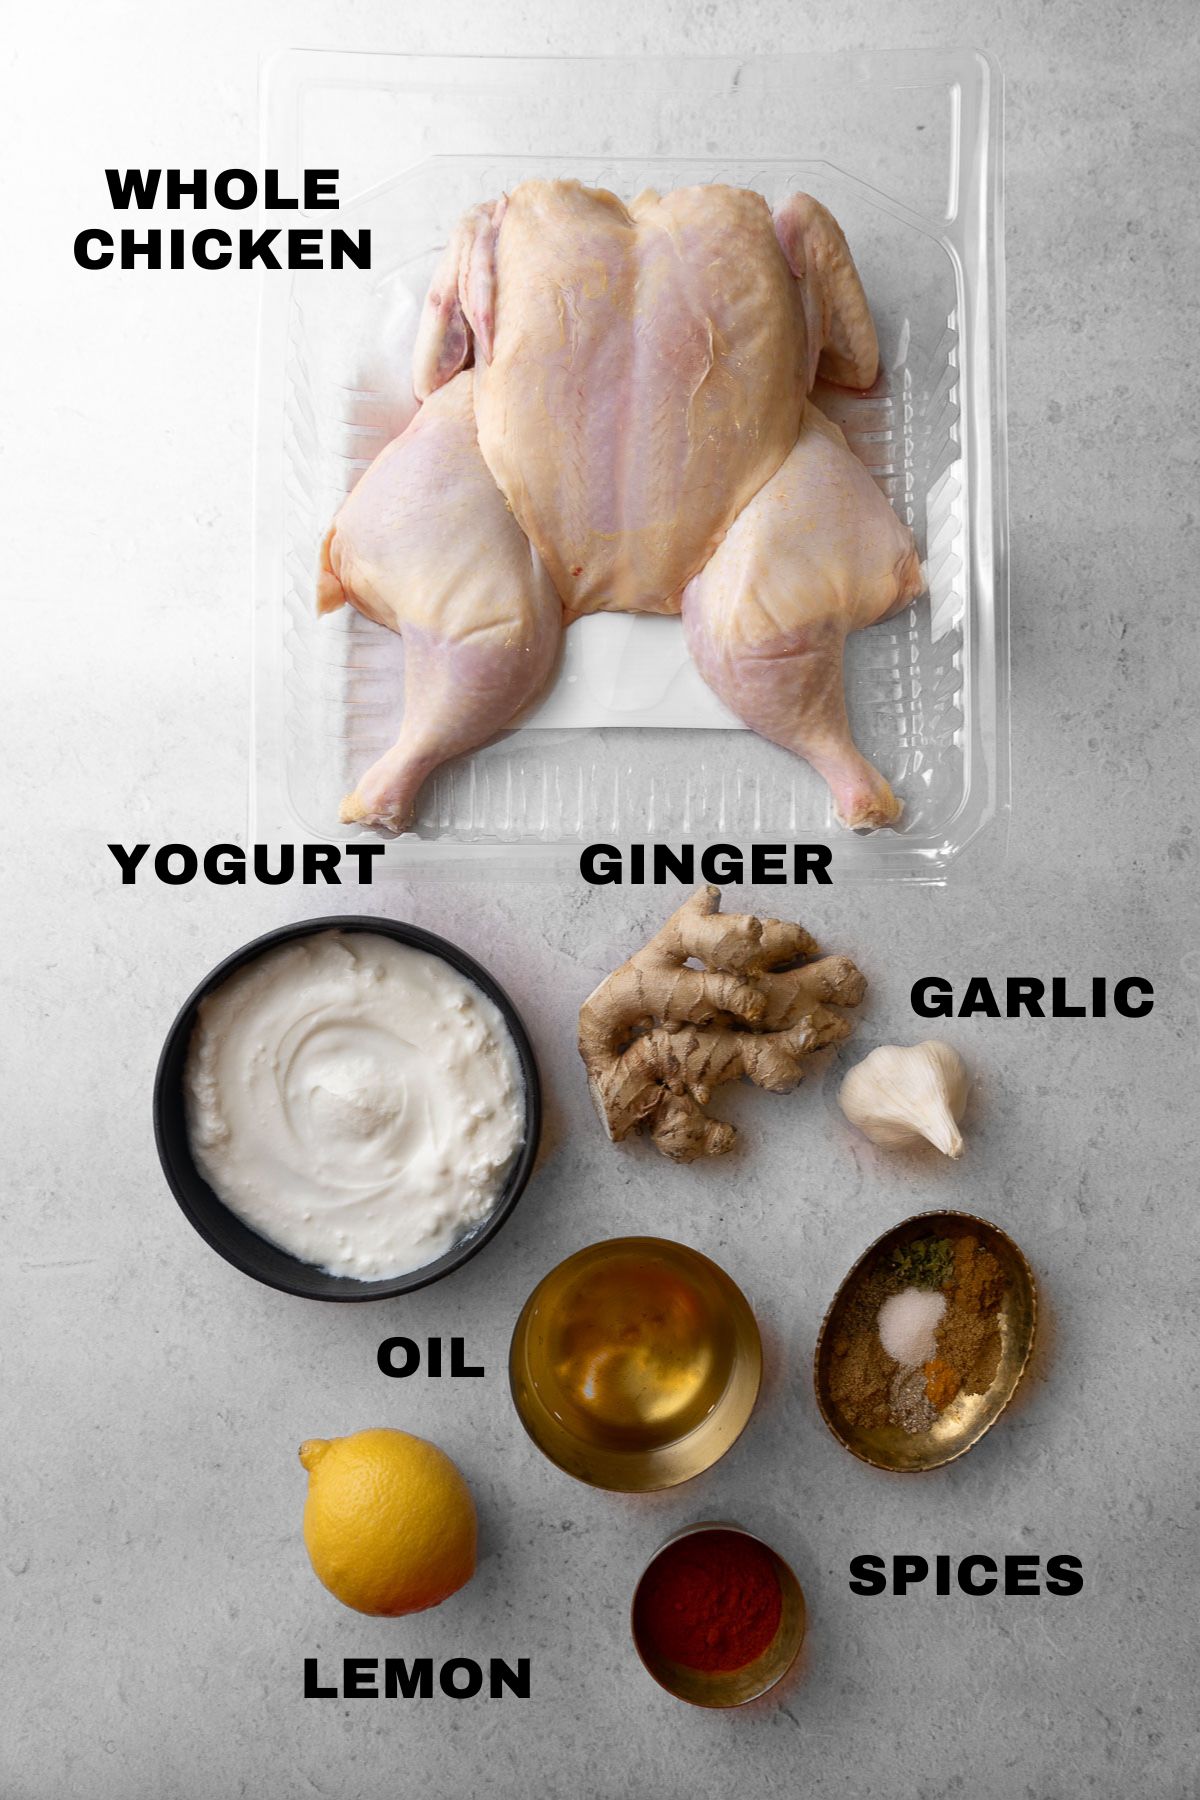 Spatchcocked chicken, yogurt, ginger, garlic, spices, oil, and lemon ingredients with labels.